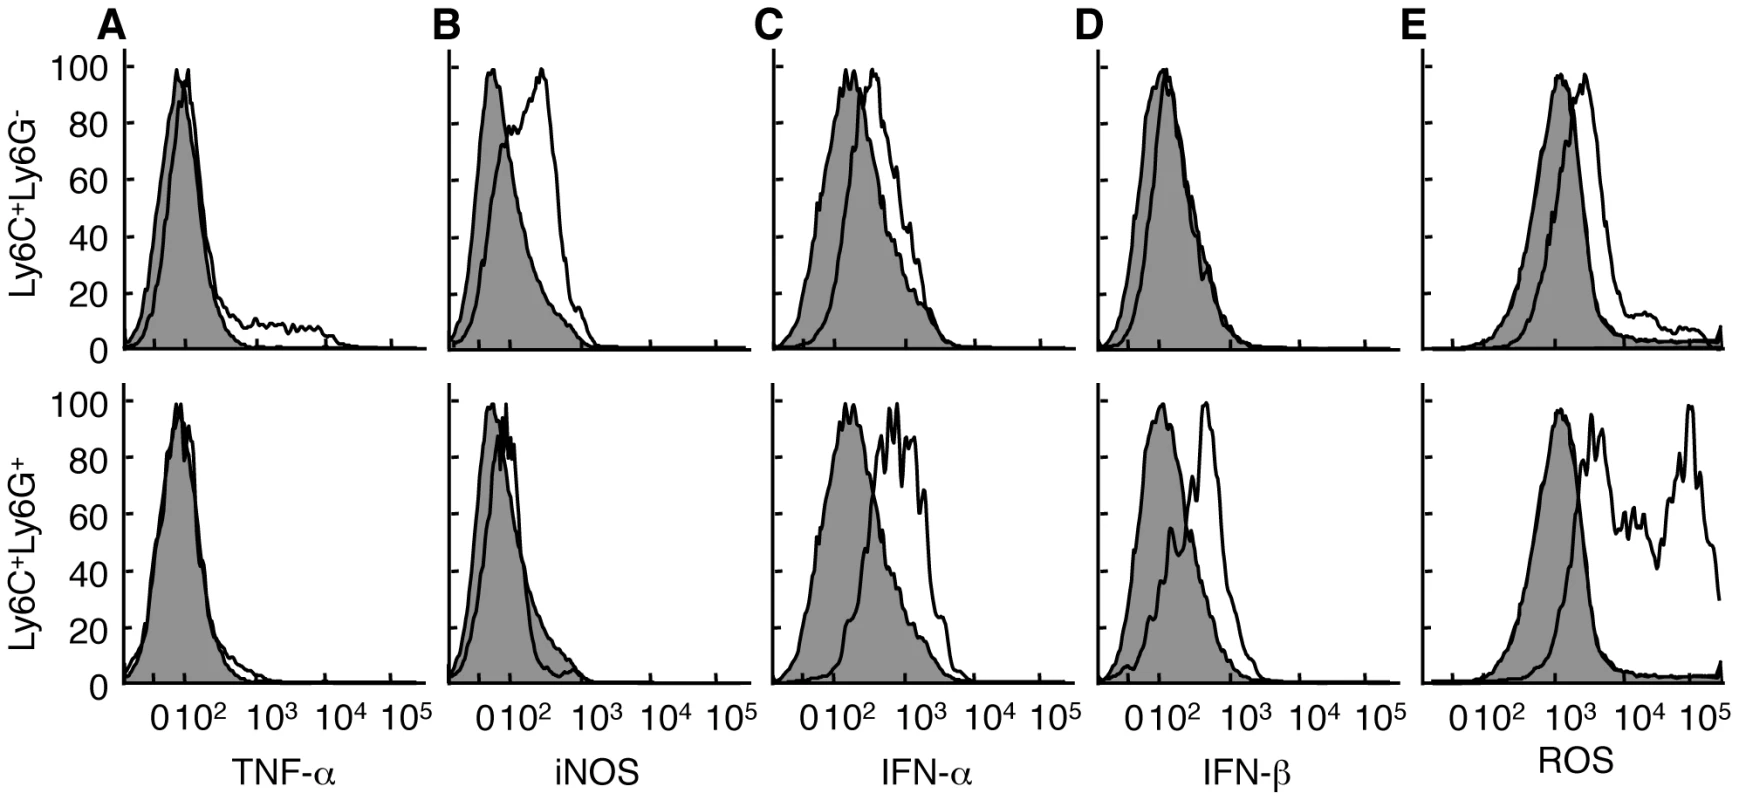 Ly6C<sup><b>+</b></sup>Ly6G<sup>-</sup> and Ly6C<sup><b>+</b></sup>Ly6G<sup><b>+</b></sup> cells have distinct functional profiles.